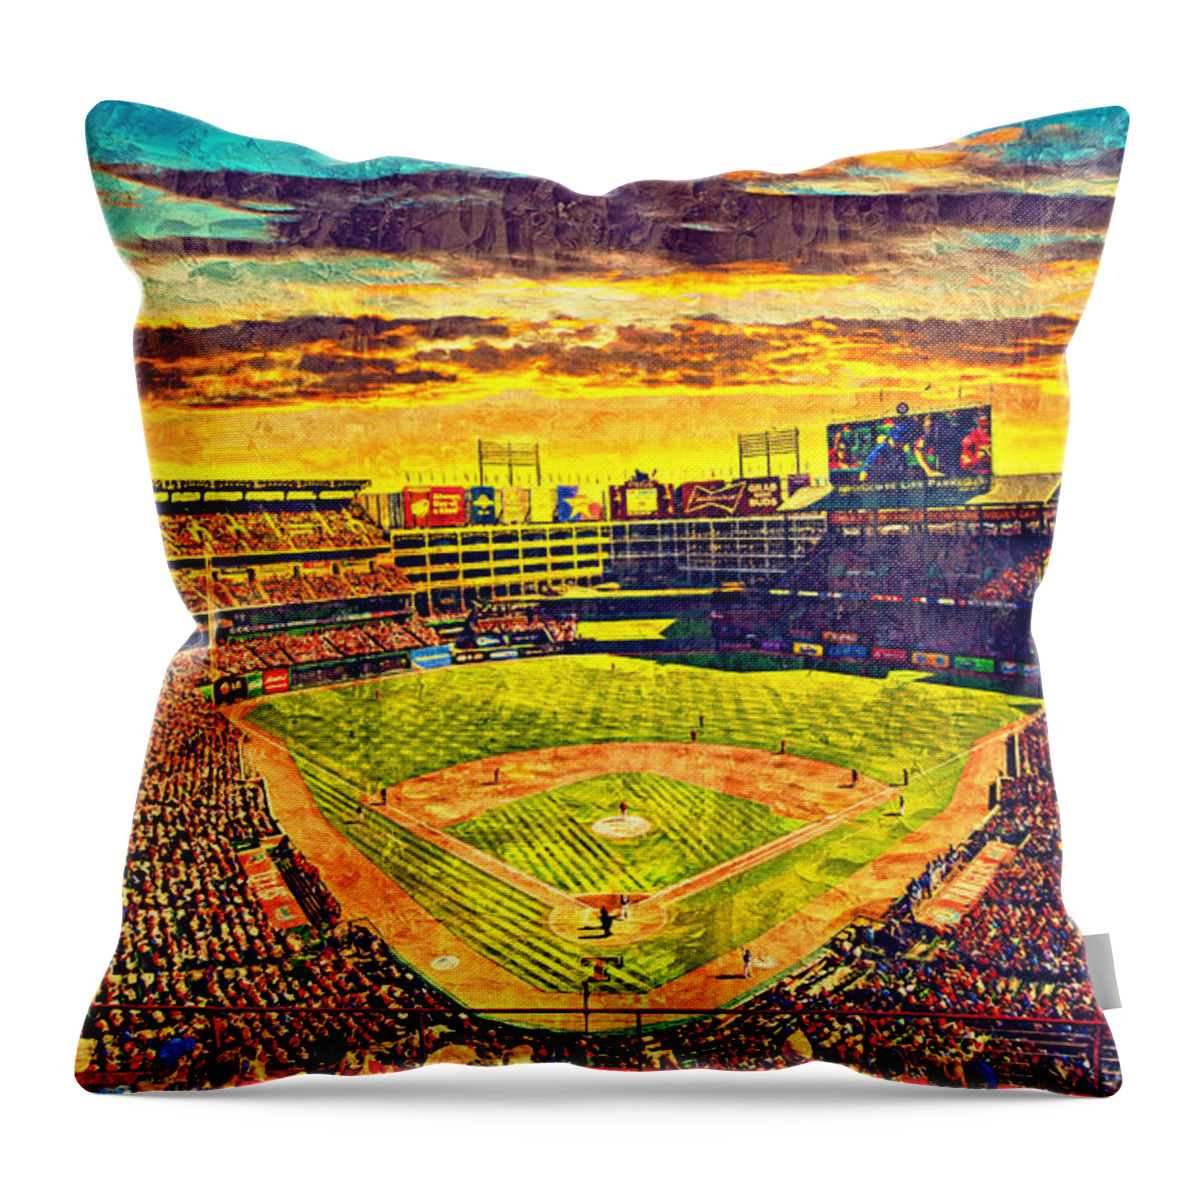 Globe Life Park Throw Pillow featuring the digital art Globe Life Park in Arlington, Texas, at sunset - digital painting by Nicko Prints